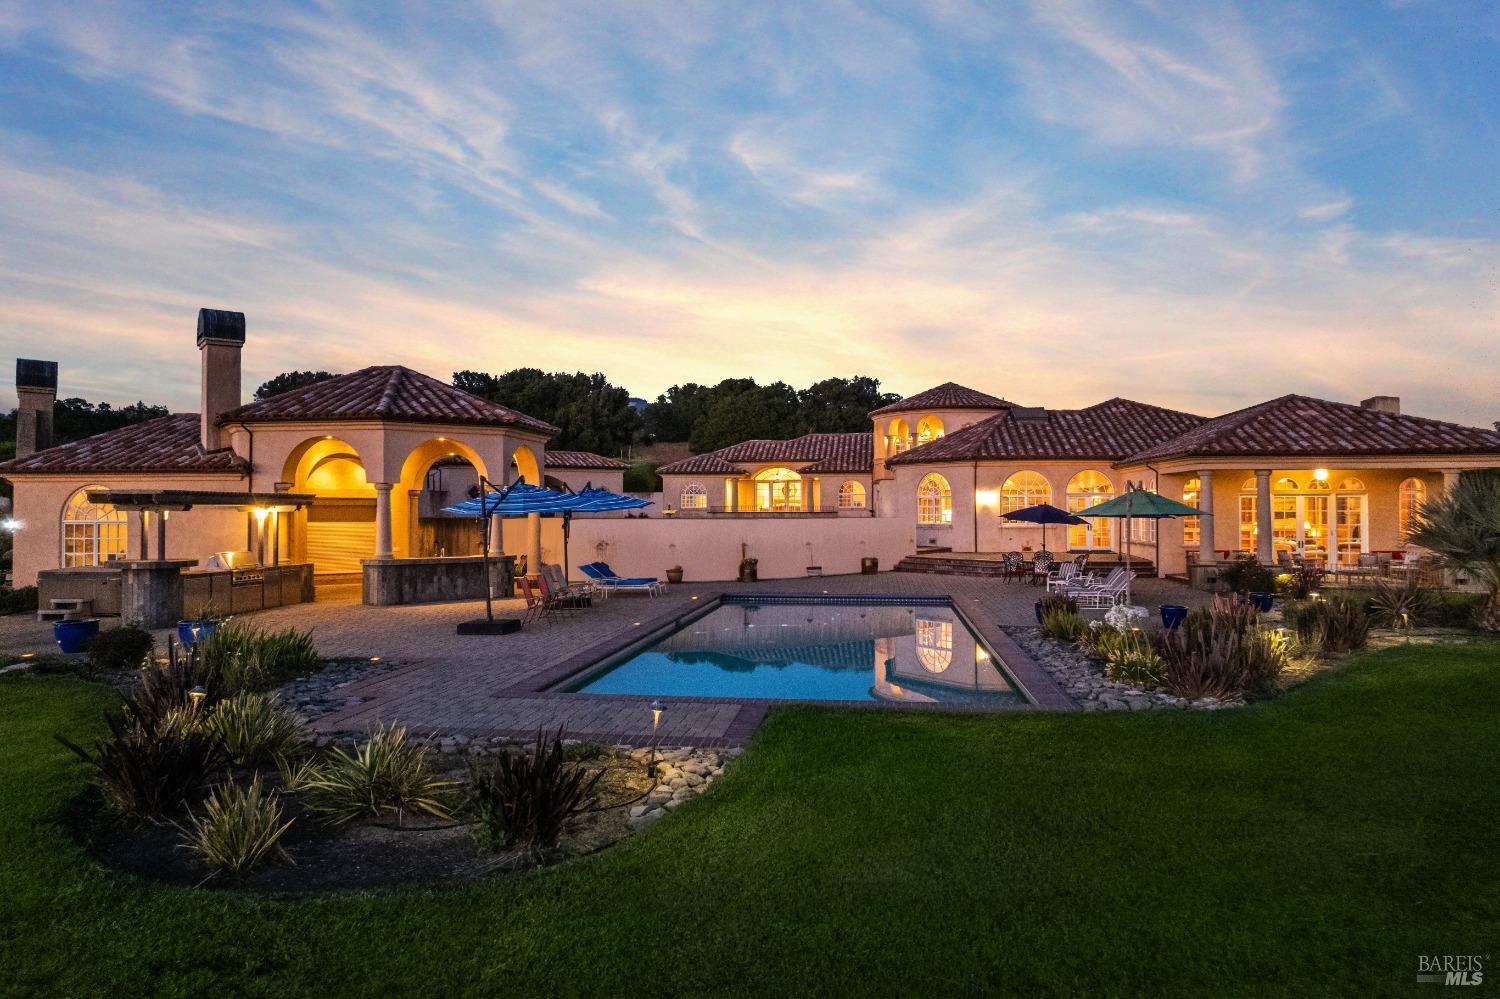 Outdoor living at it's finest from sunrise to sunset.